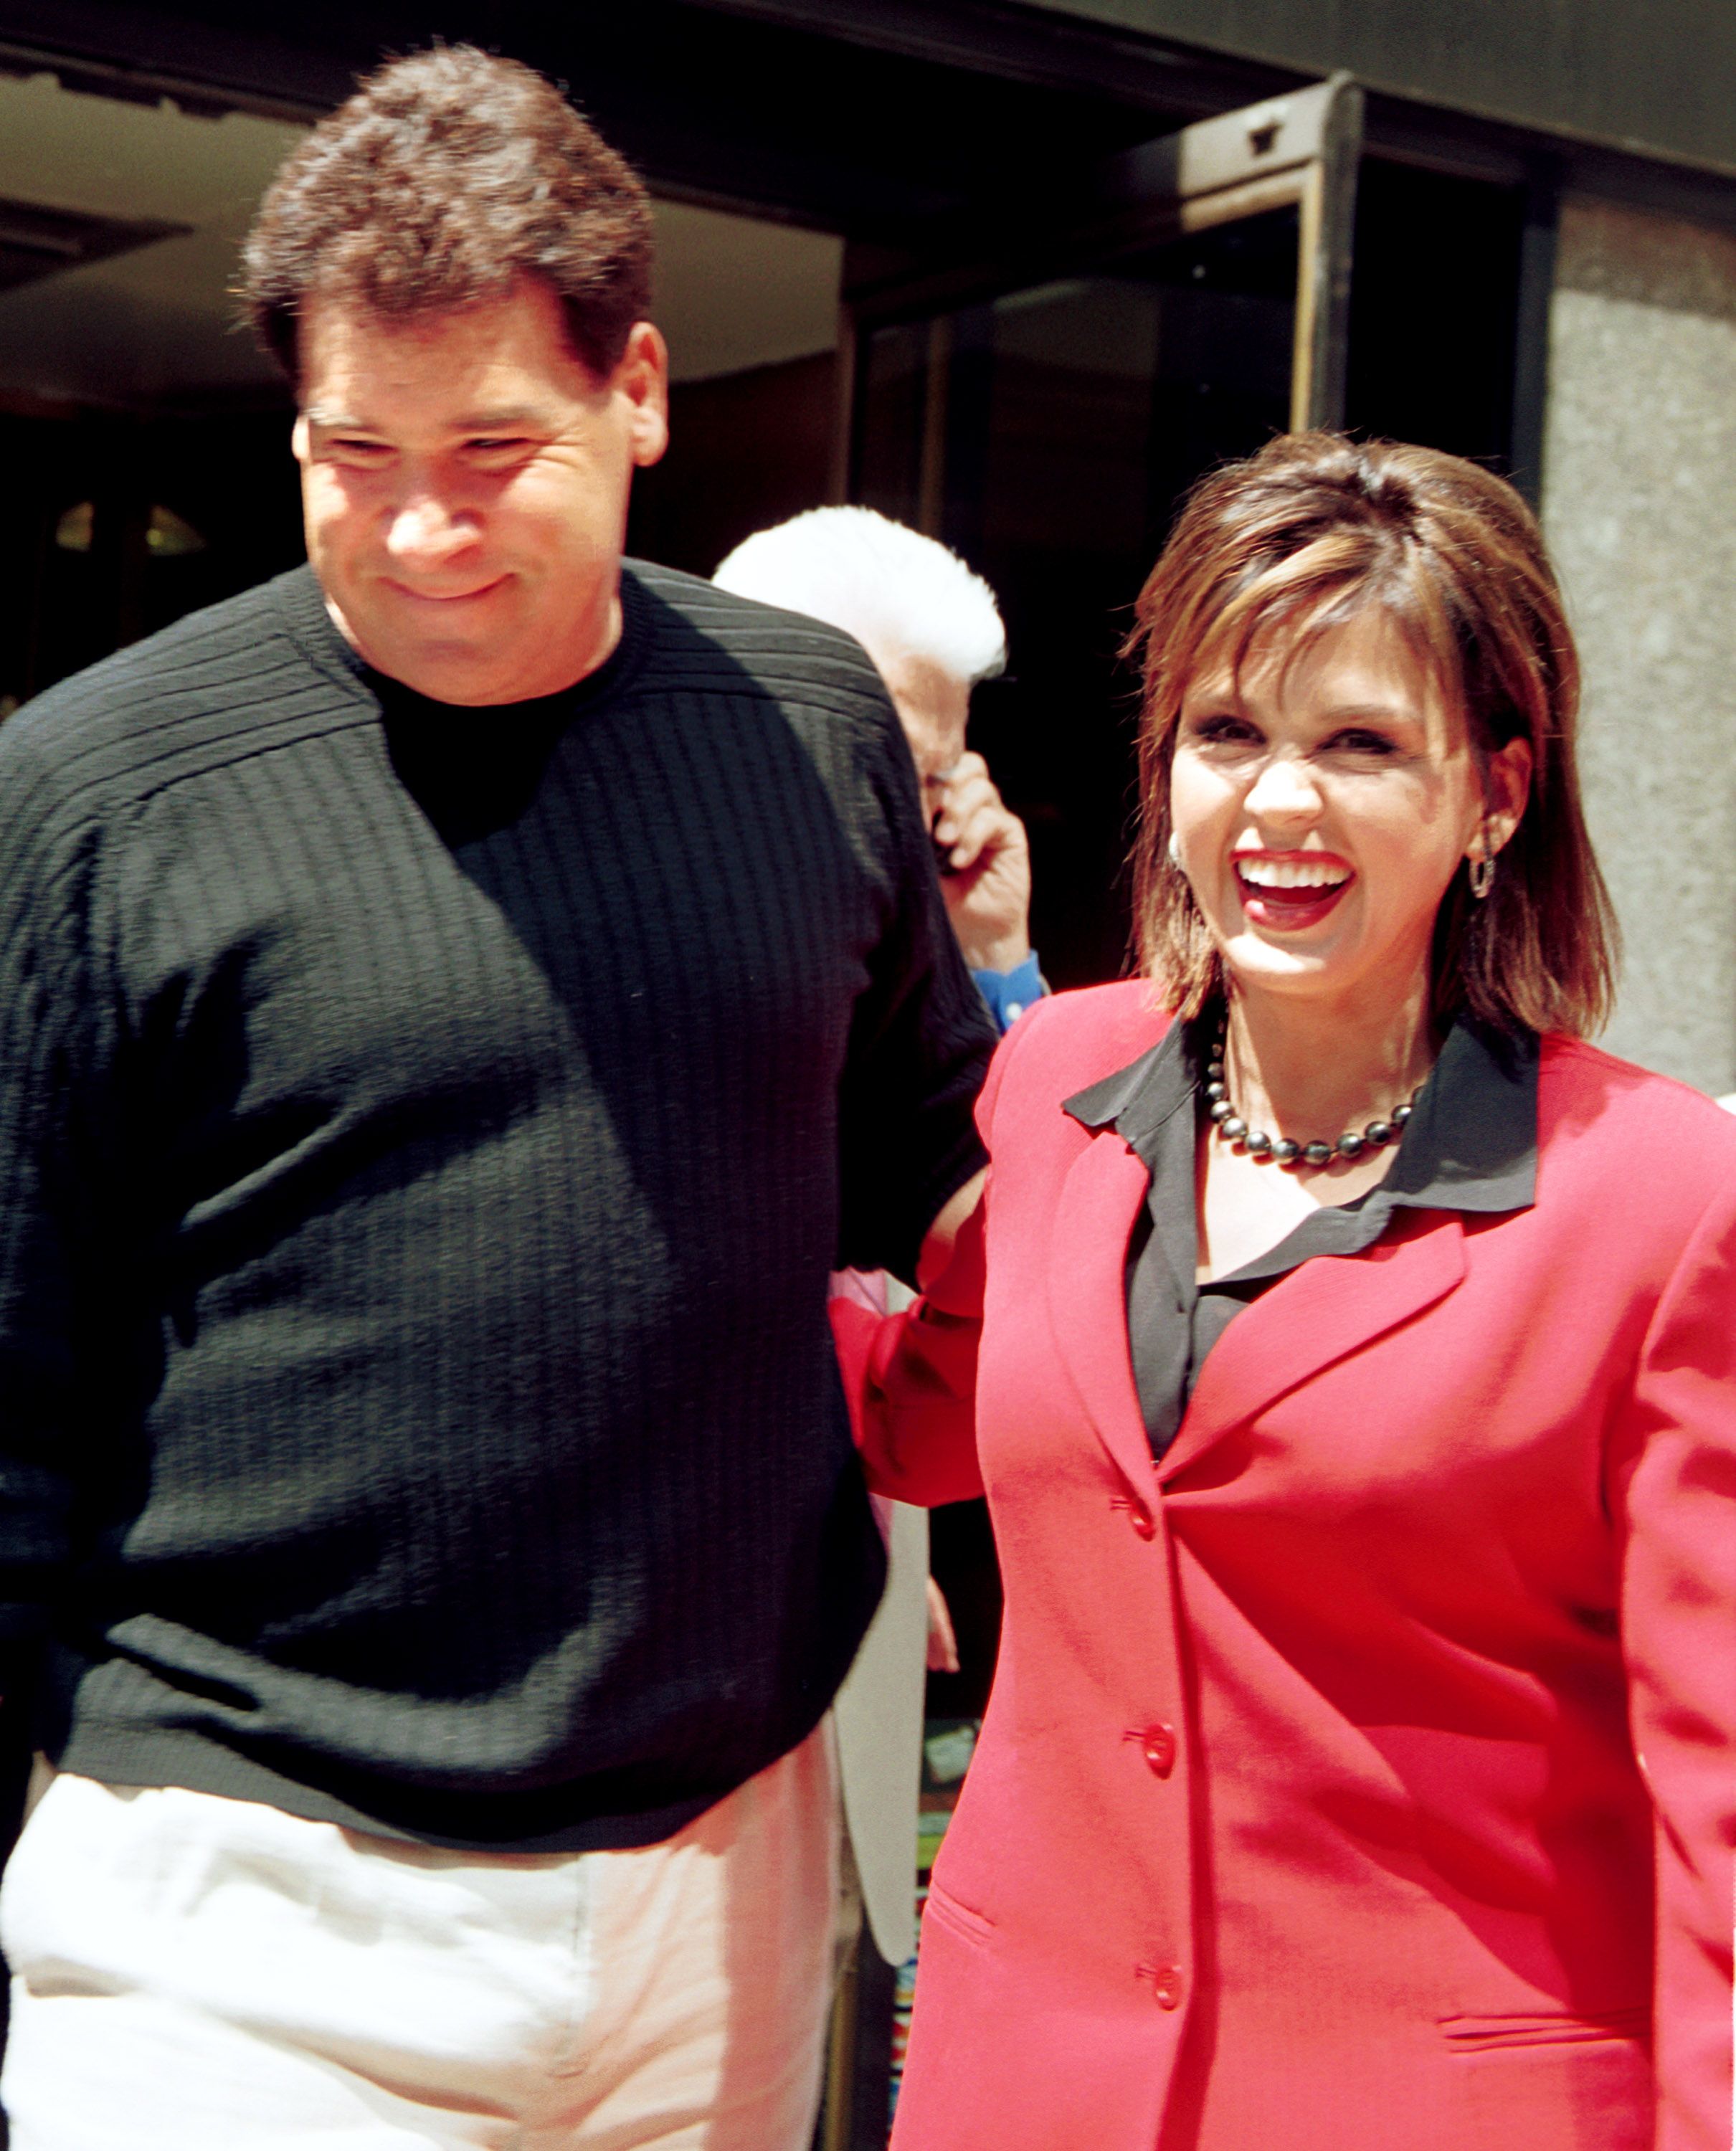 Brian Blosil and Marie Osmond at a book signing for her new book "Behind the Smile" on May 1, 2001, in New York City. | Source: Diane L. Cohen/Liaison/Getty Images